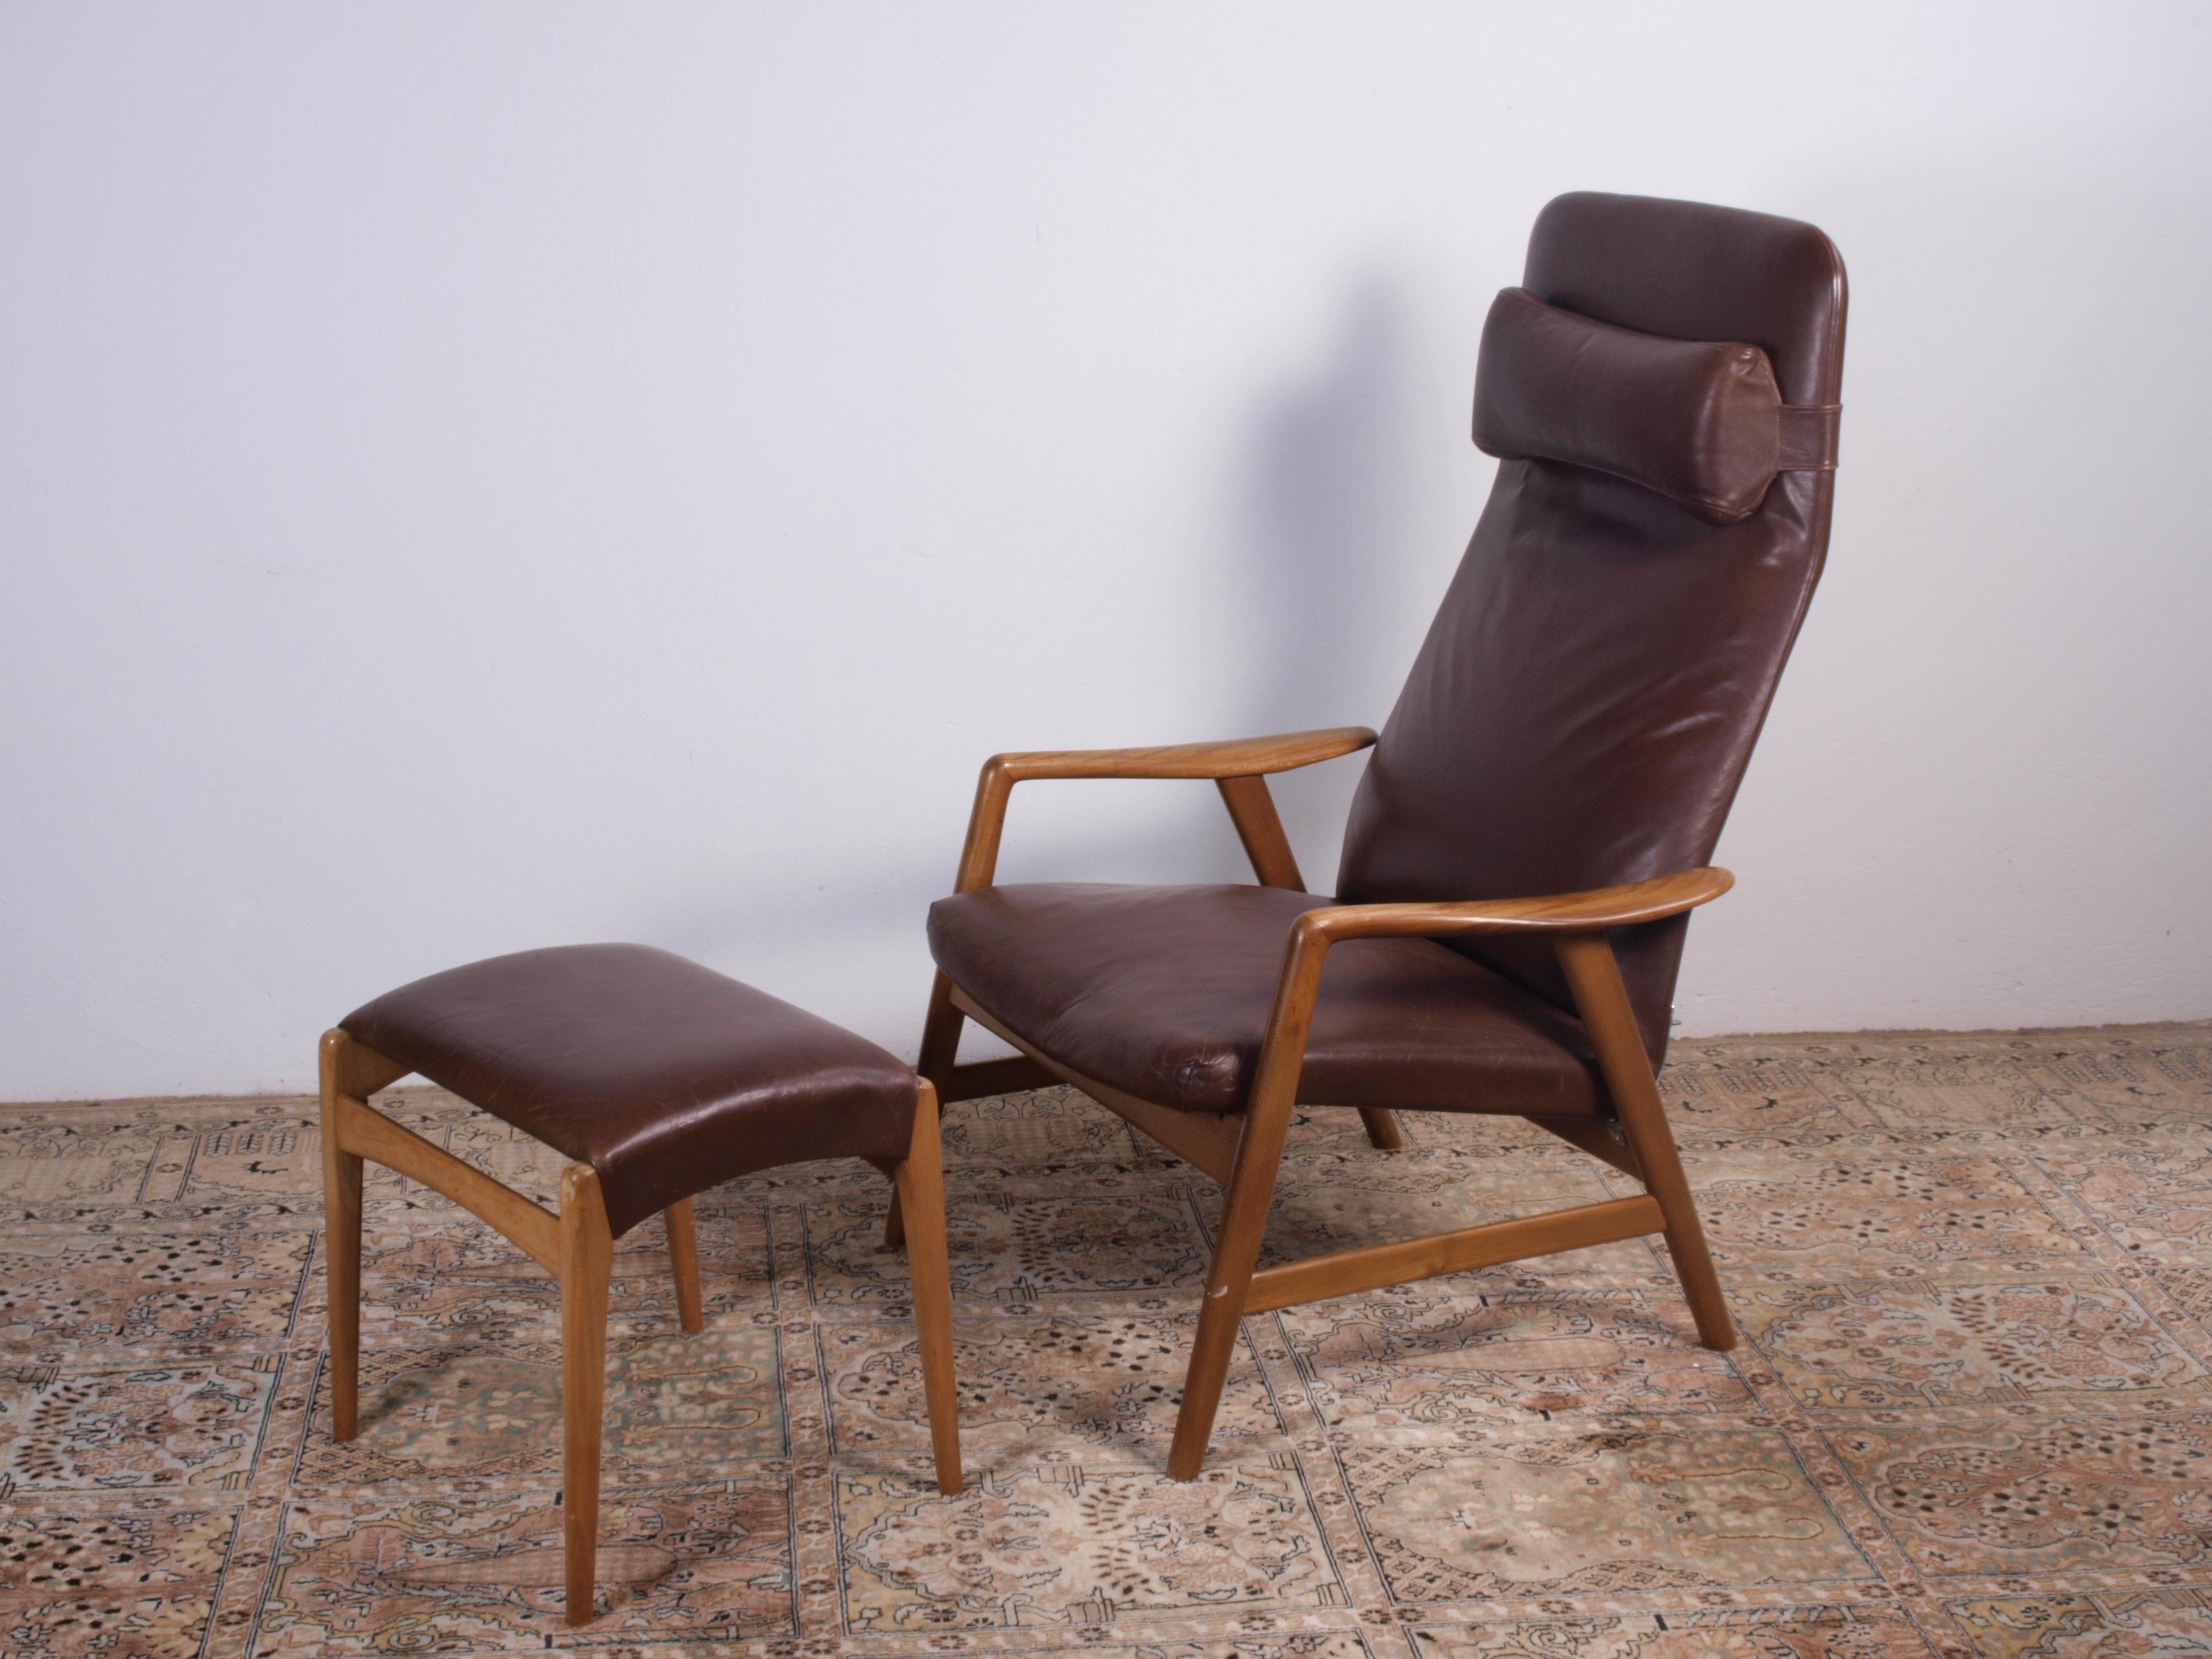 Armchair + stool, Kontur model. Design by Alf Svensson. Design of 1956 and produced by Fritz Hansen Denmark. The chairs can be adjusted in sitting and supine position. Needs to be reupholstered